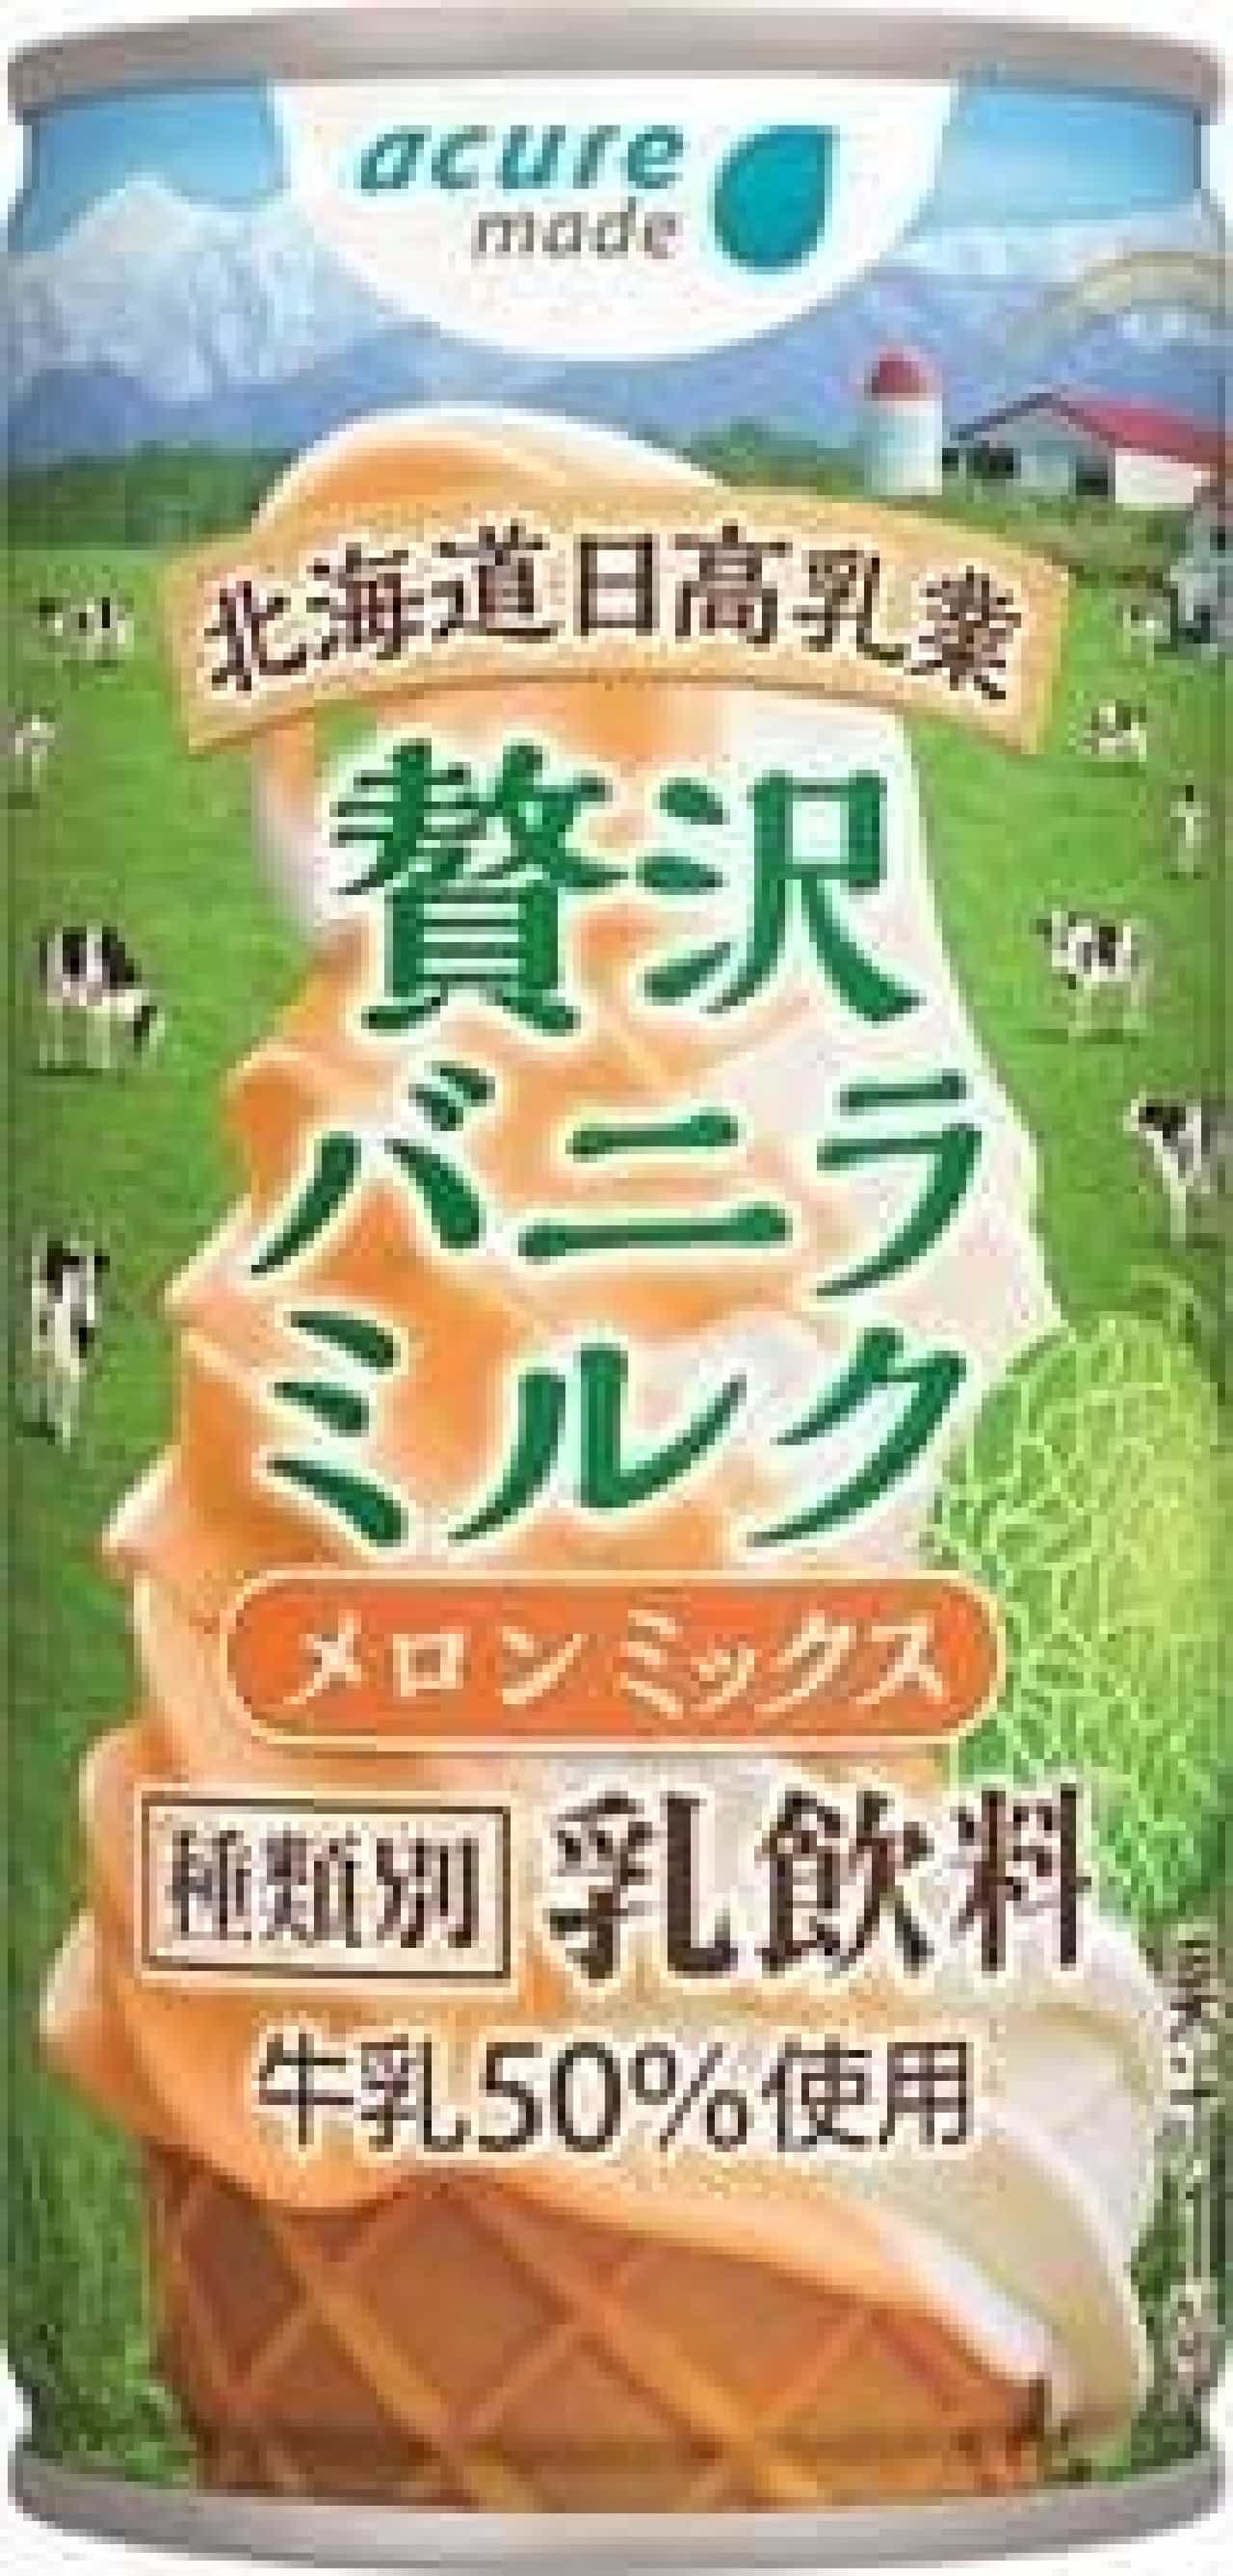 From the "soft serve ice cream" and "luxury vanilla milk" series, the new summer flavor "Melon Mix"